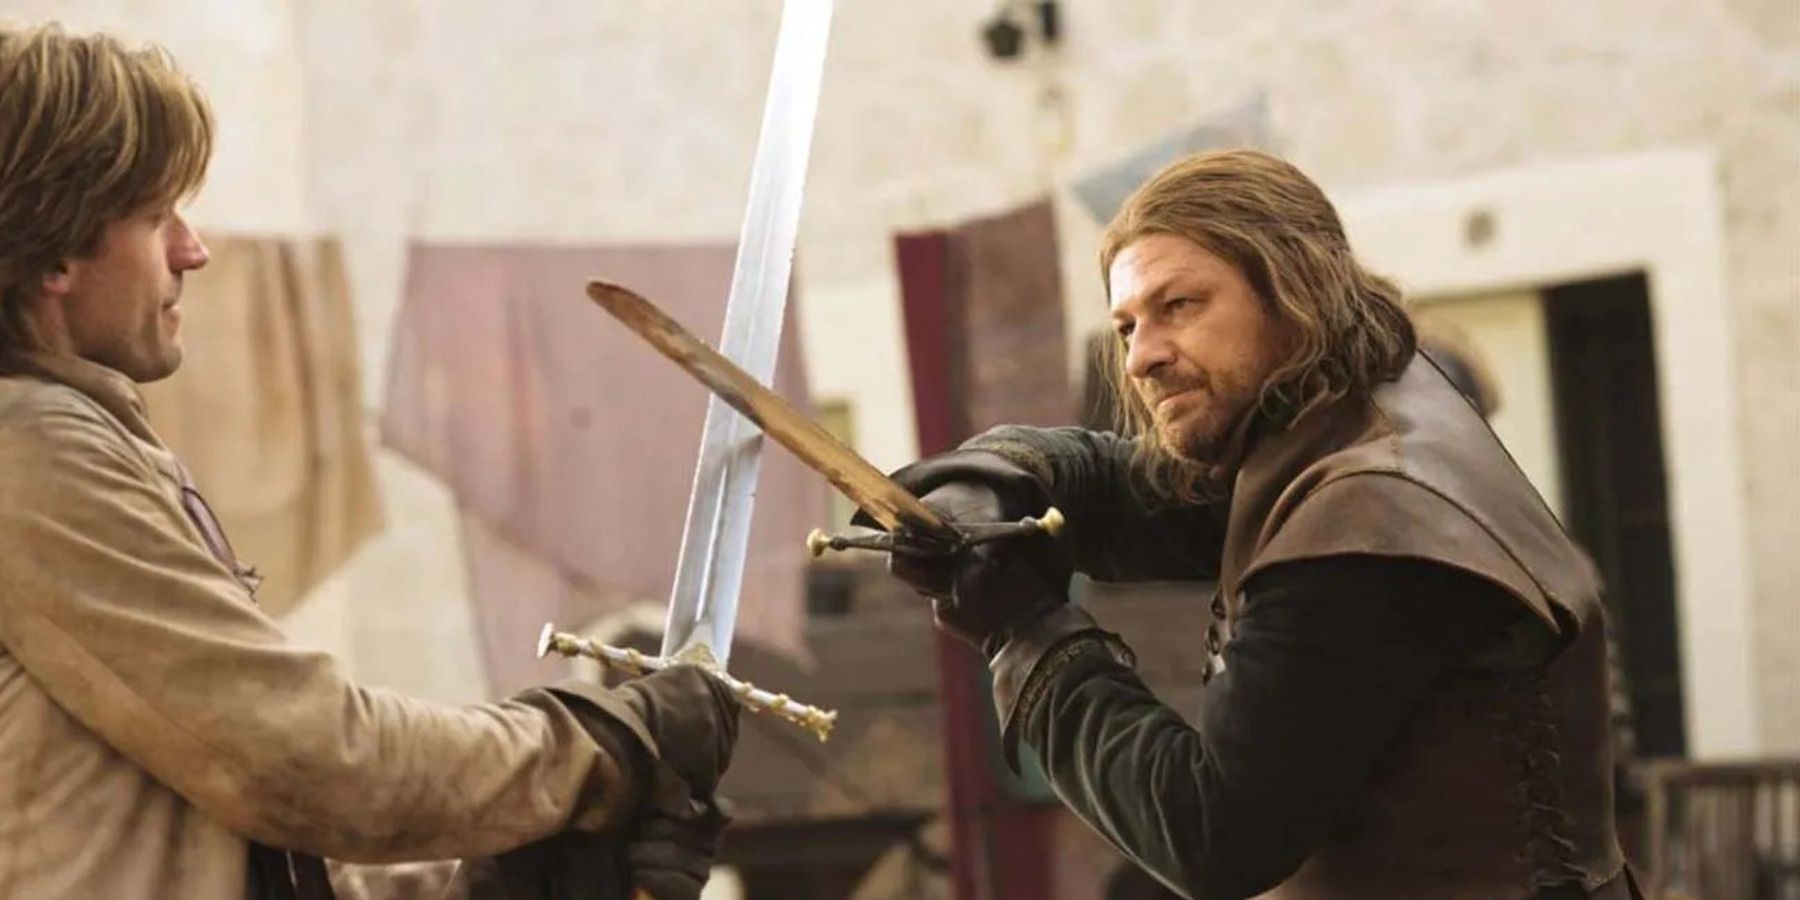 Ned Stark and Jaime Lannister clash blades in King's Landing In Game of Thrones.